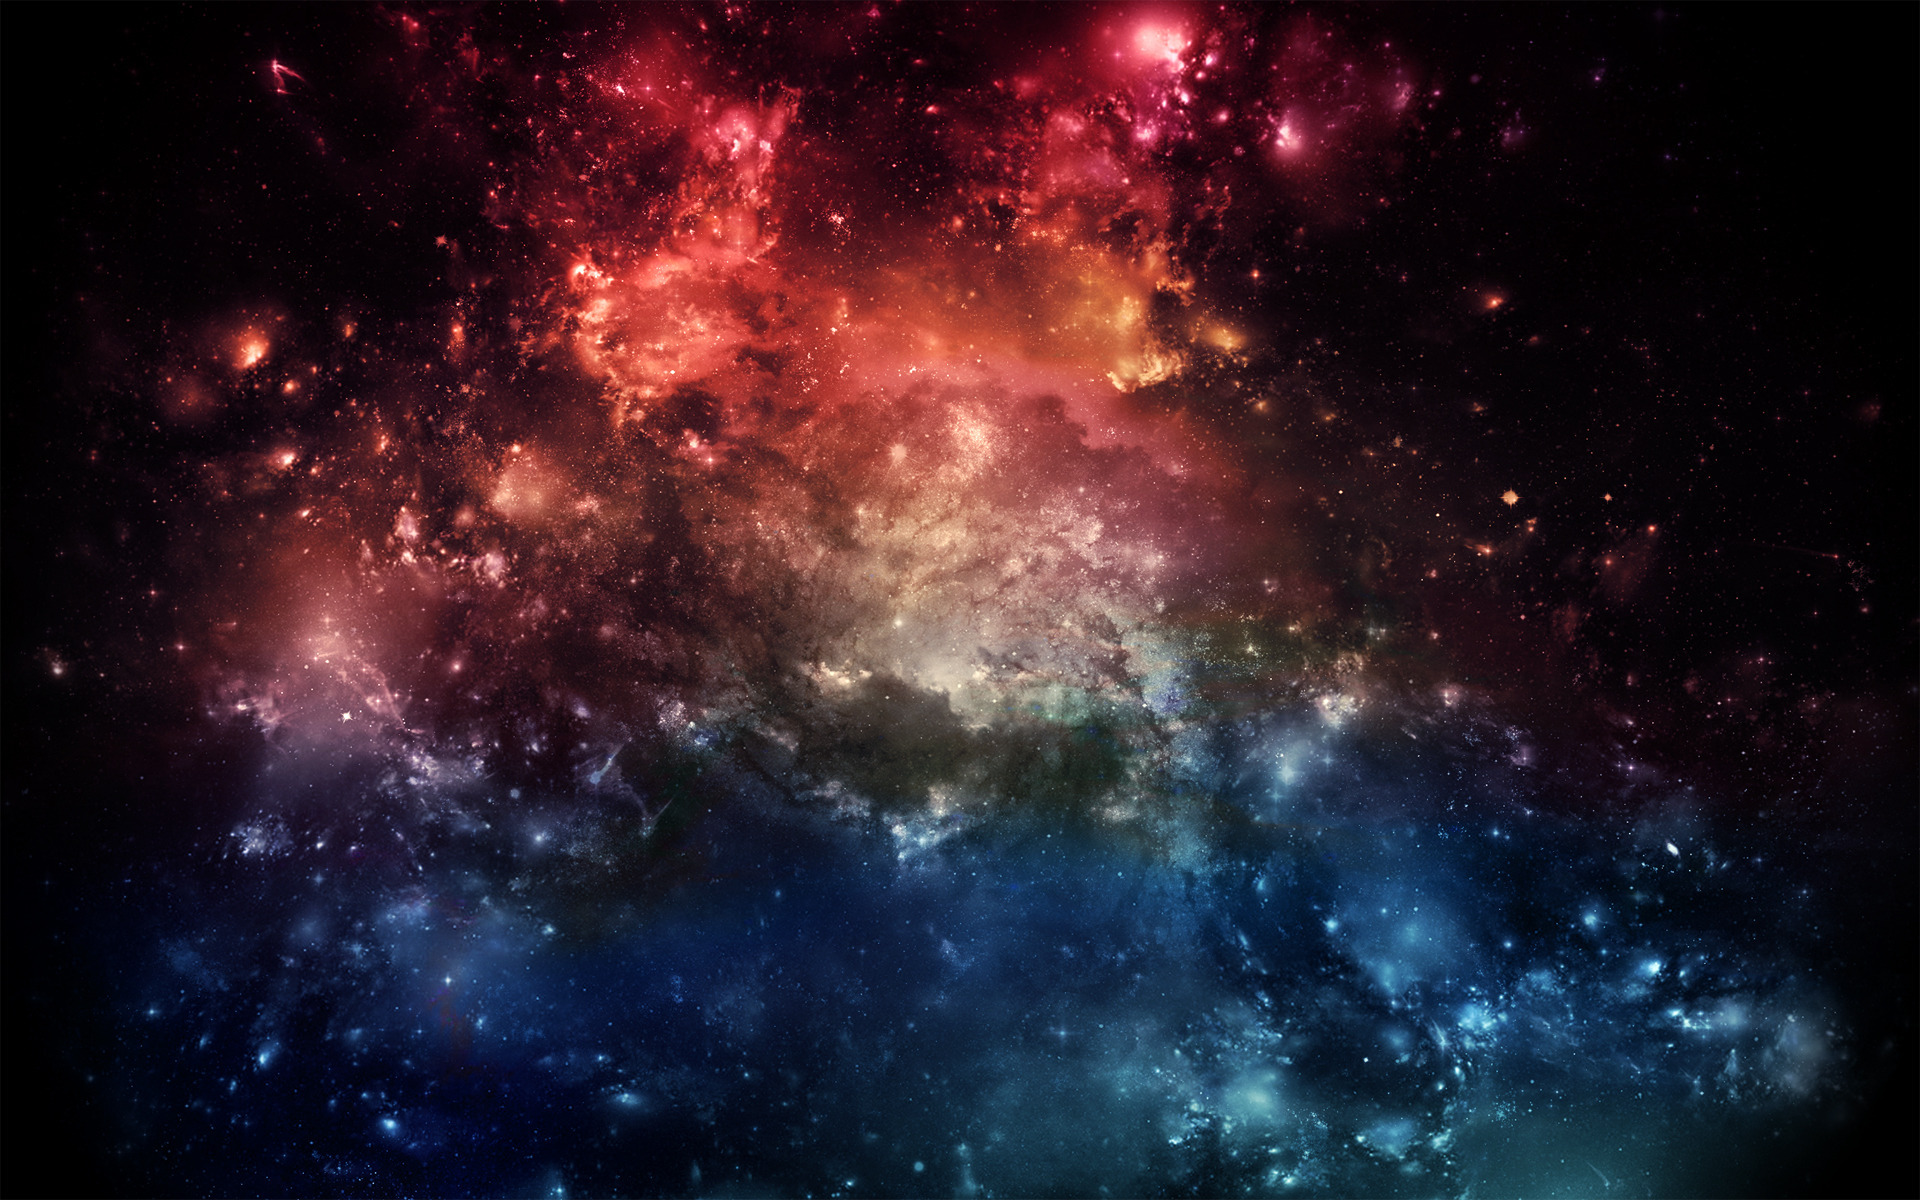 Galaxy Print Background - Bing images